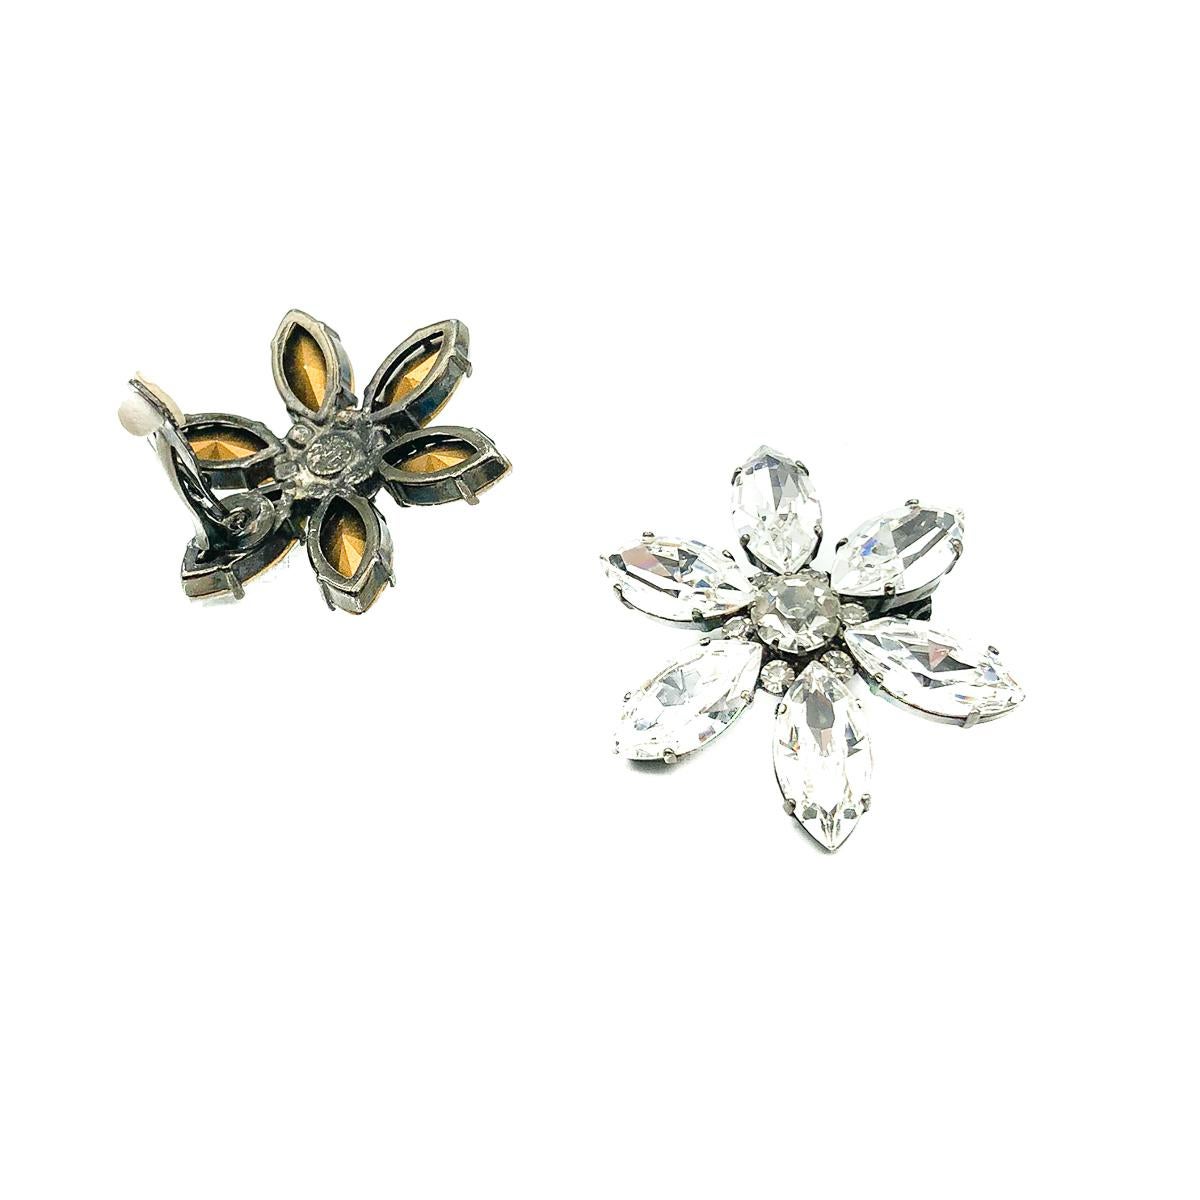 A pair of Vintage crystal flower earrings. Crafted in blackened metal and set with wonderfully large marquise crystal stones in a flower formation. In very good vintage condition without damage or repair, signed Nt, claw set stones, approx. 4cms. A